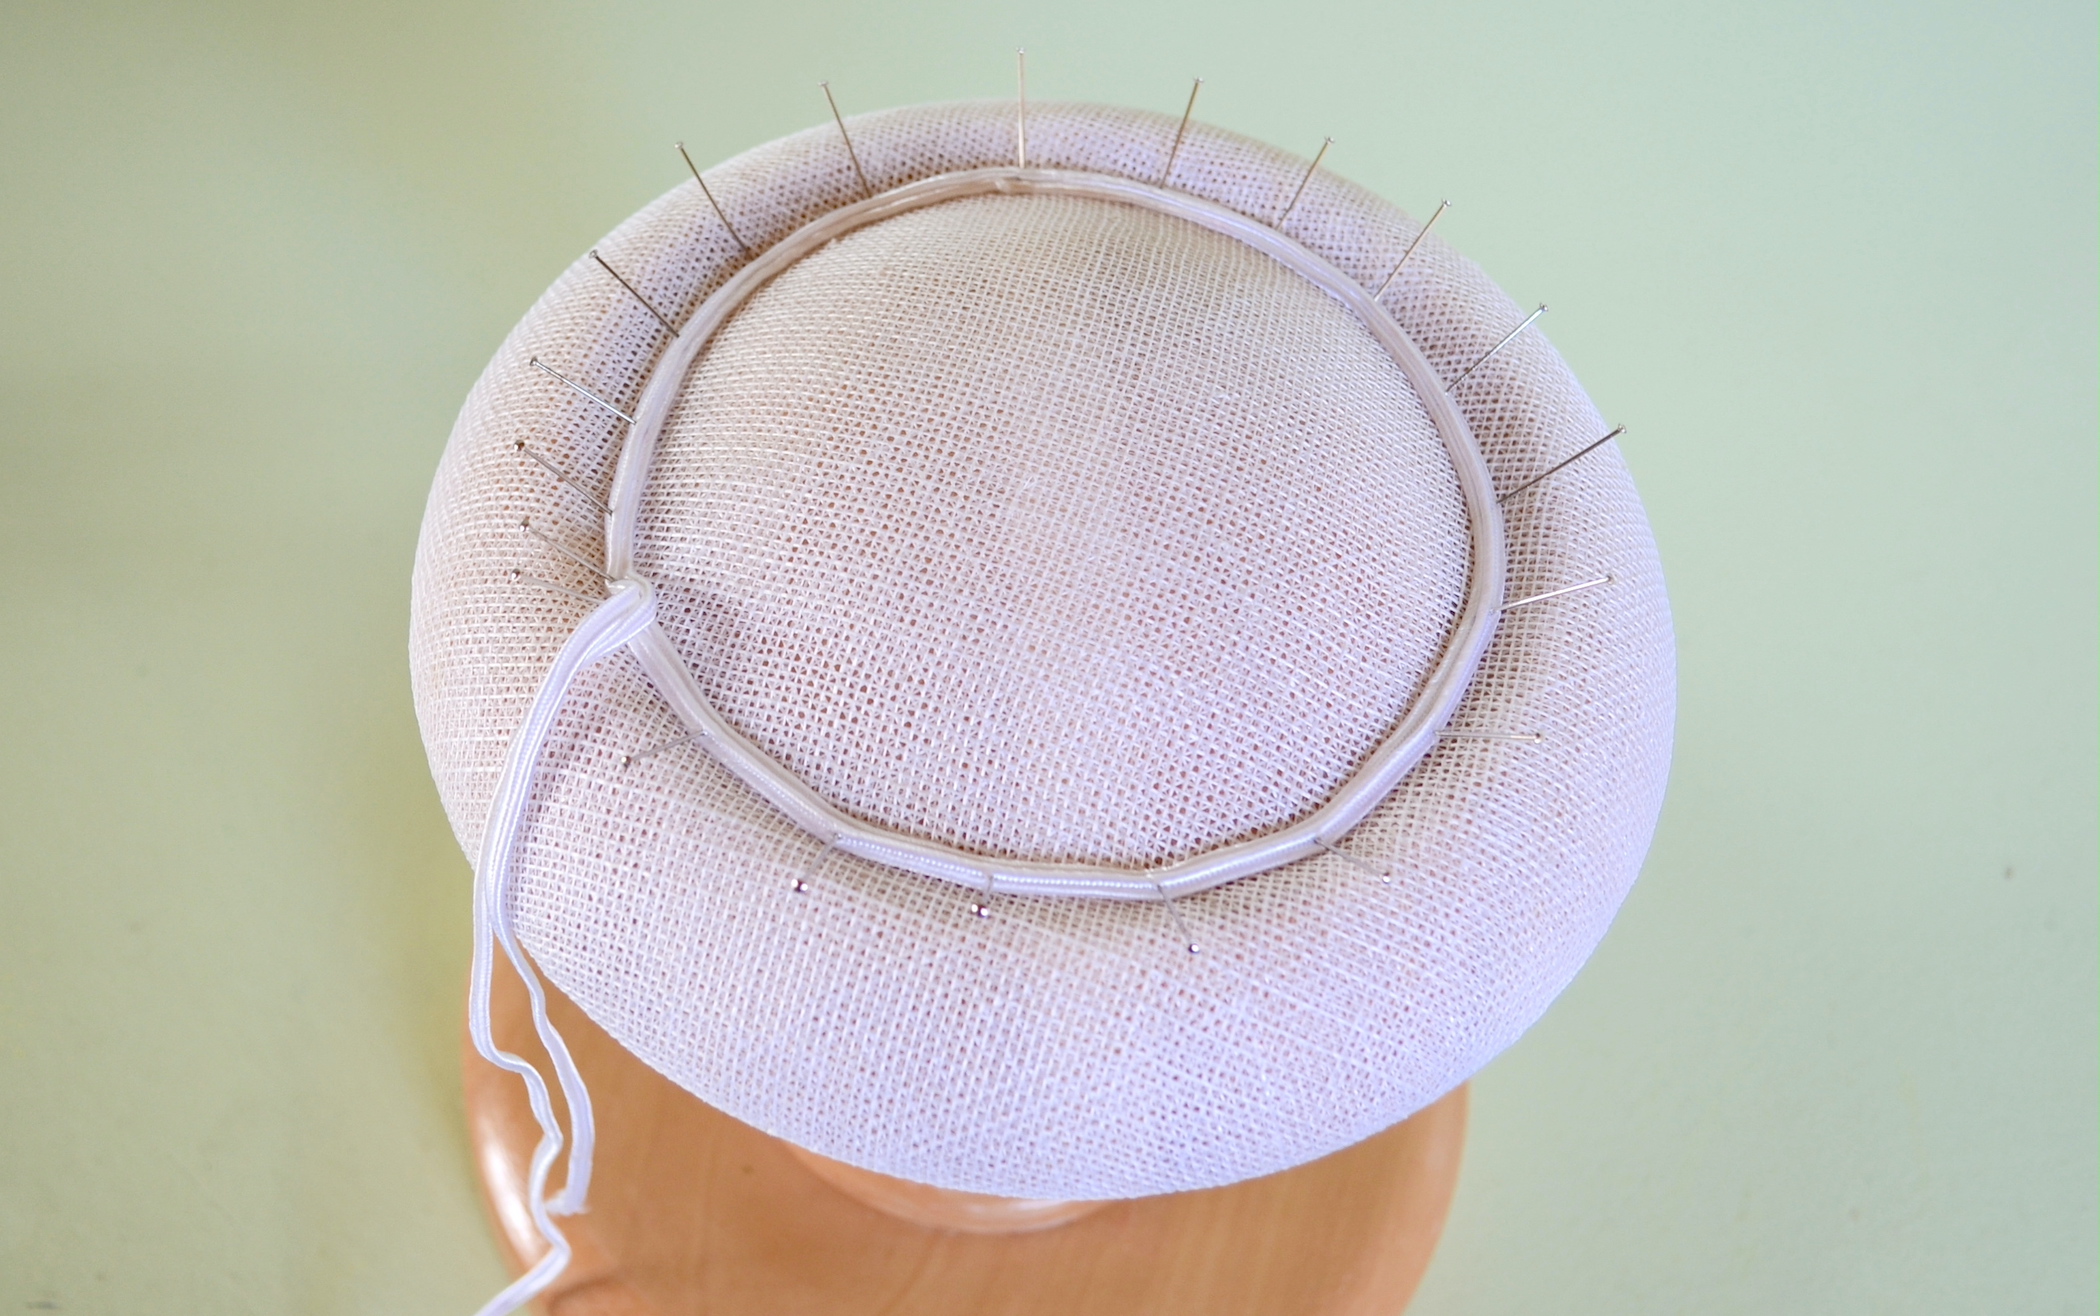 Blocking hats with a groove